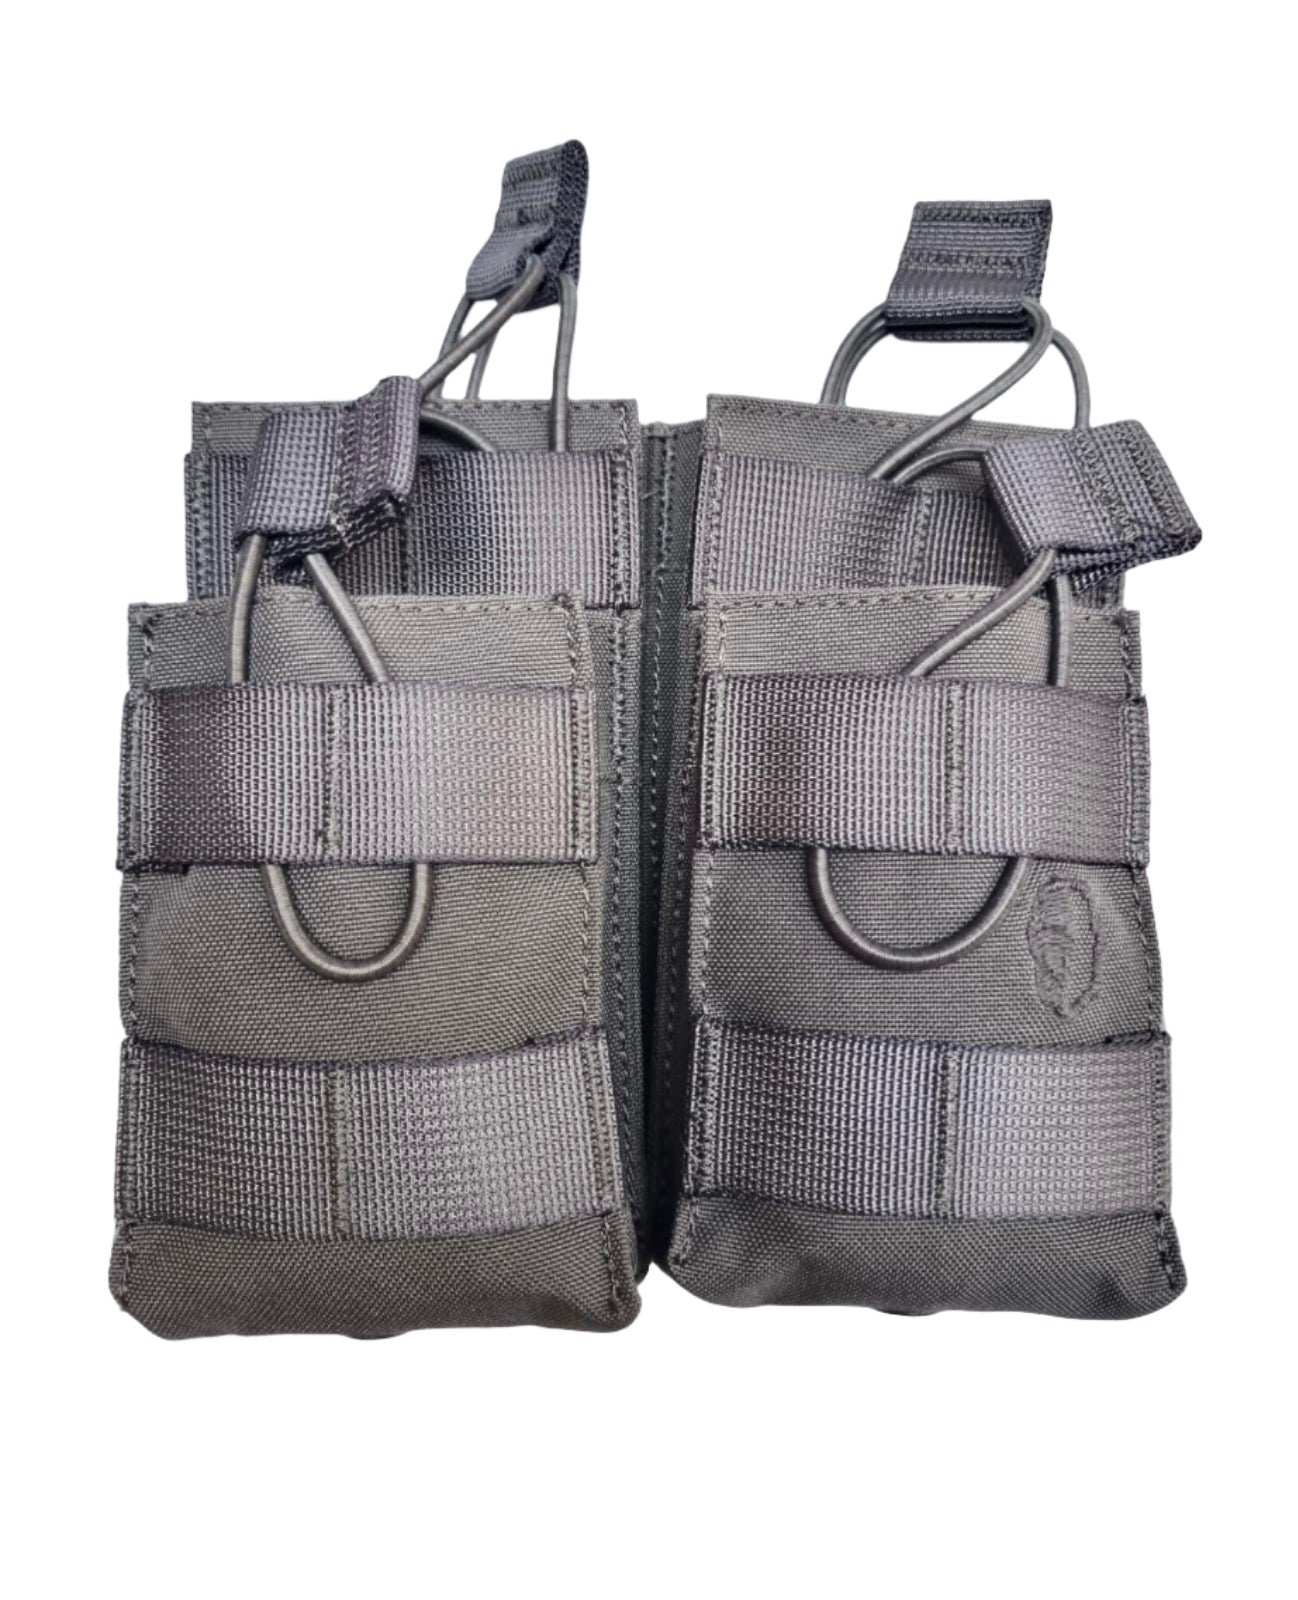 SHS - 996 STACKER OPEN-TOP MAG POUCH DOUBLE COLOUR SILVER GREY